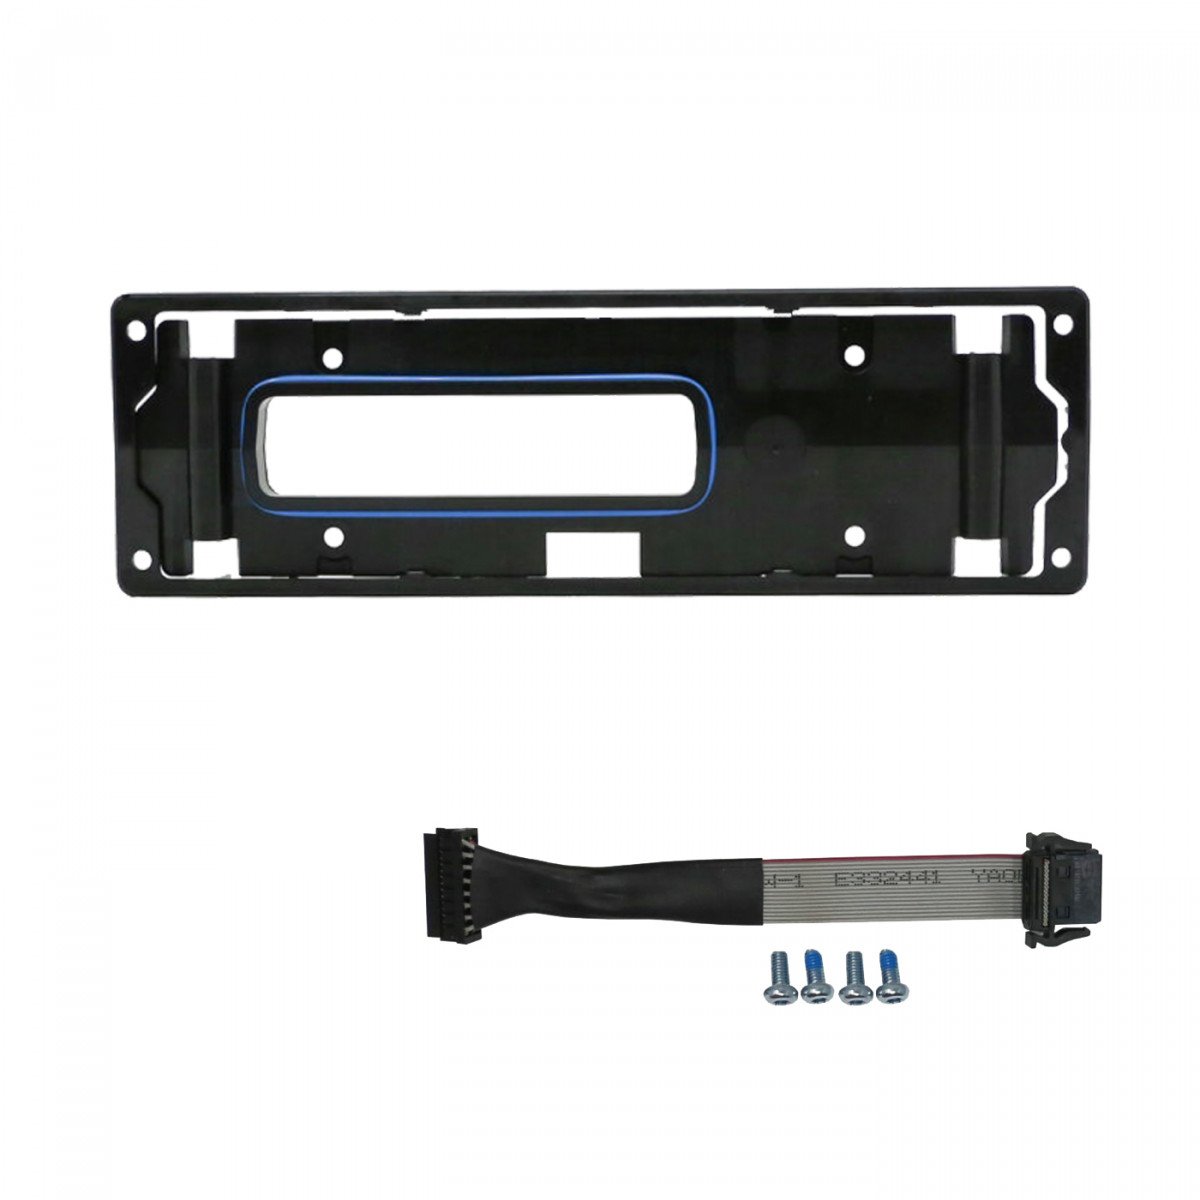 SEPURA adapter kit for front mounting of the SCC3 on the front panel of the SCG 300-02050